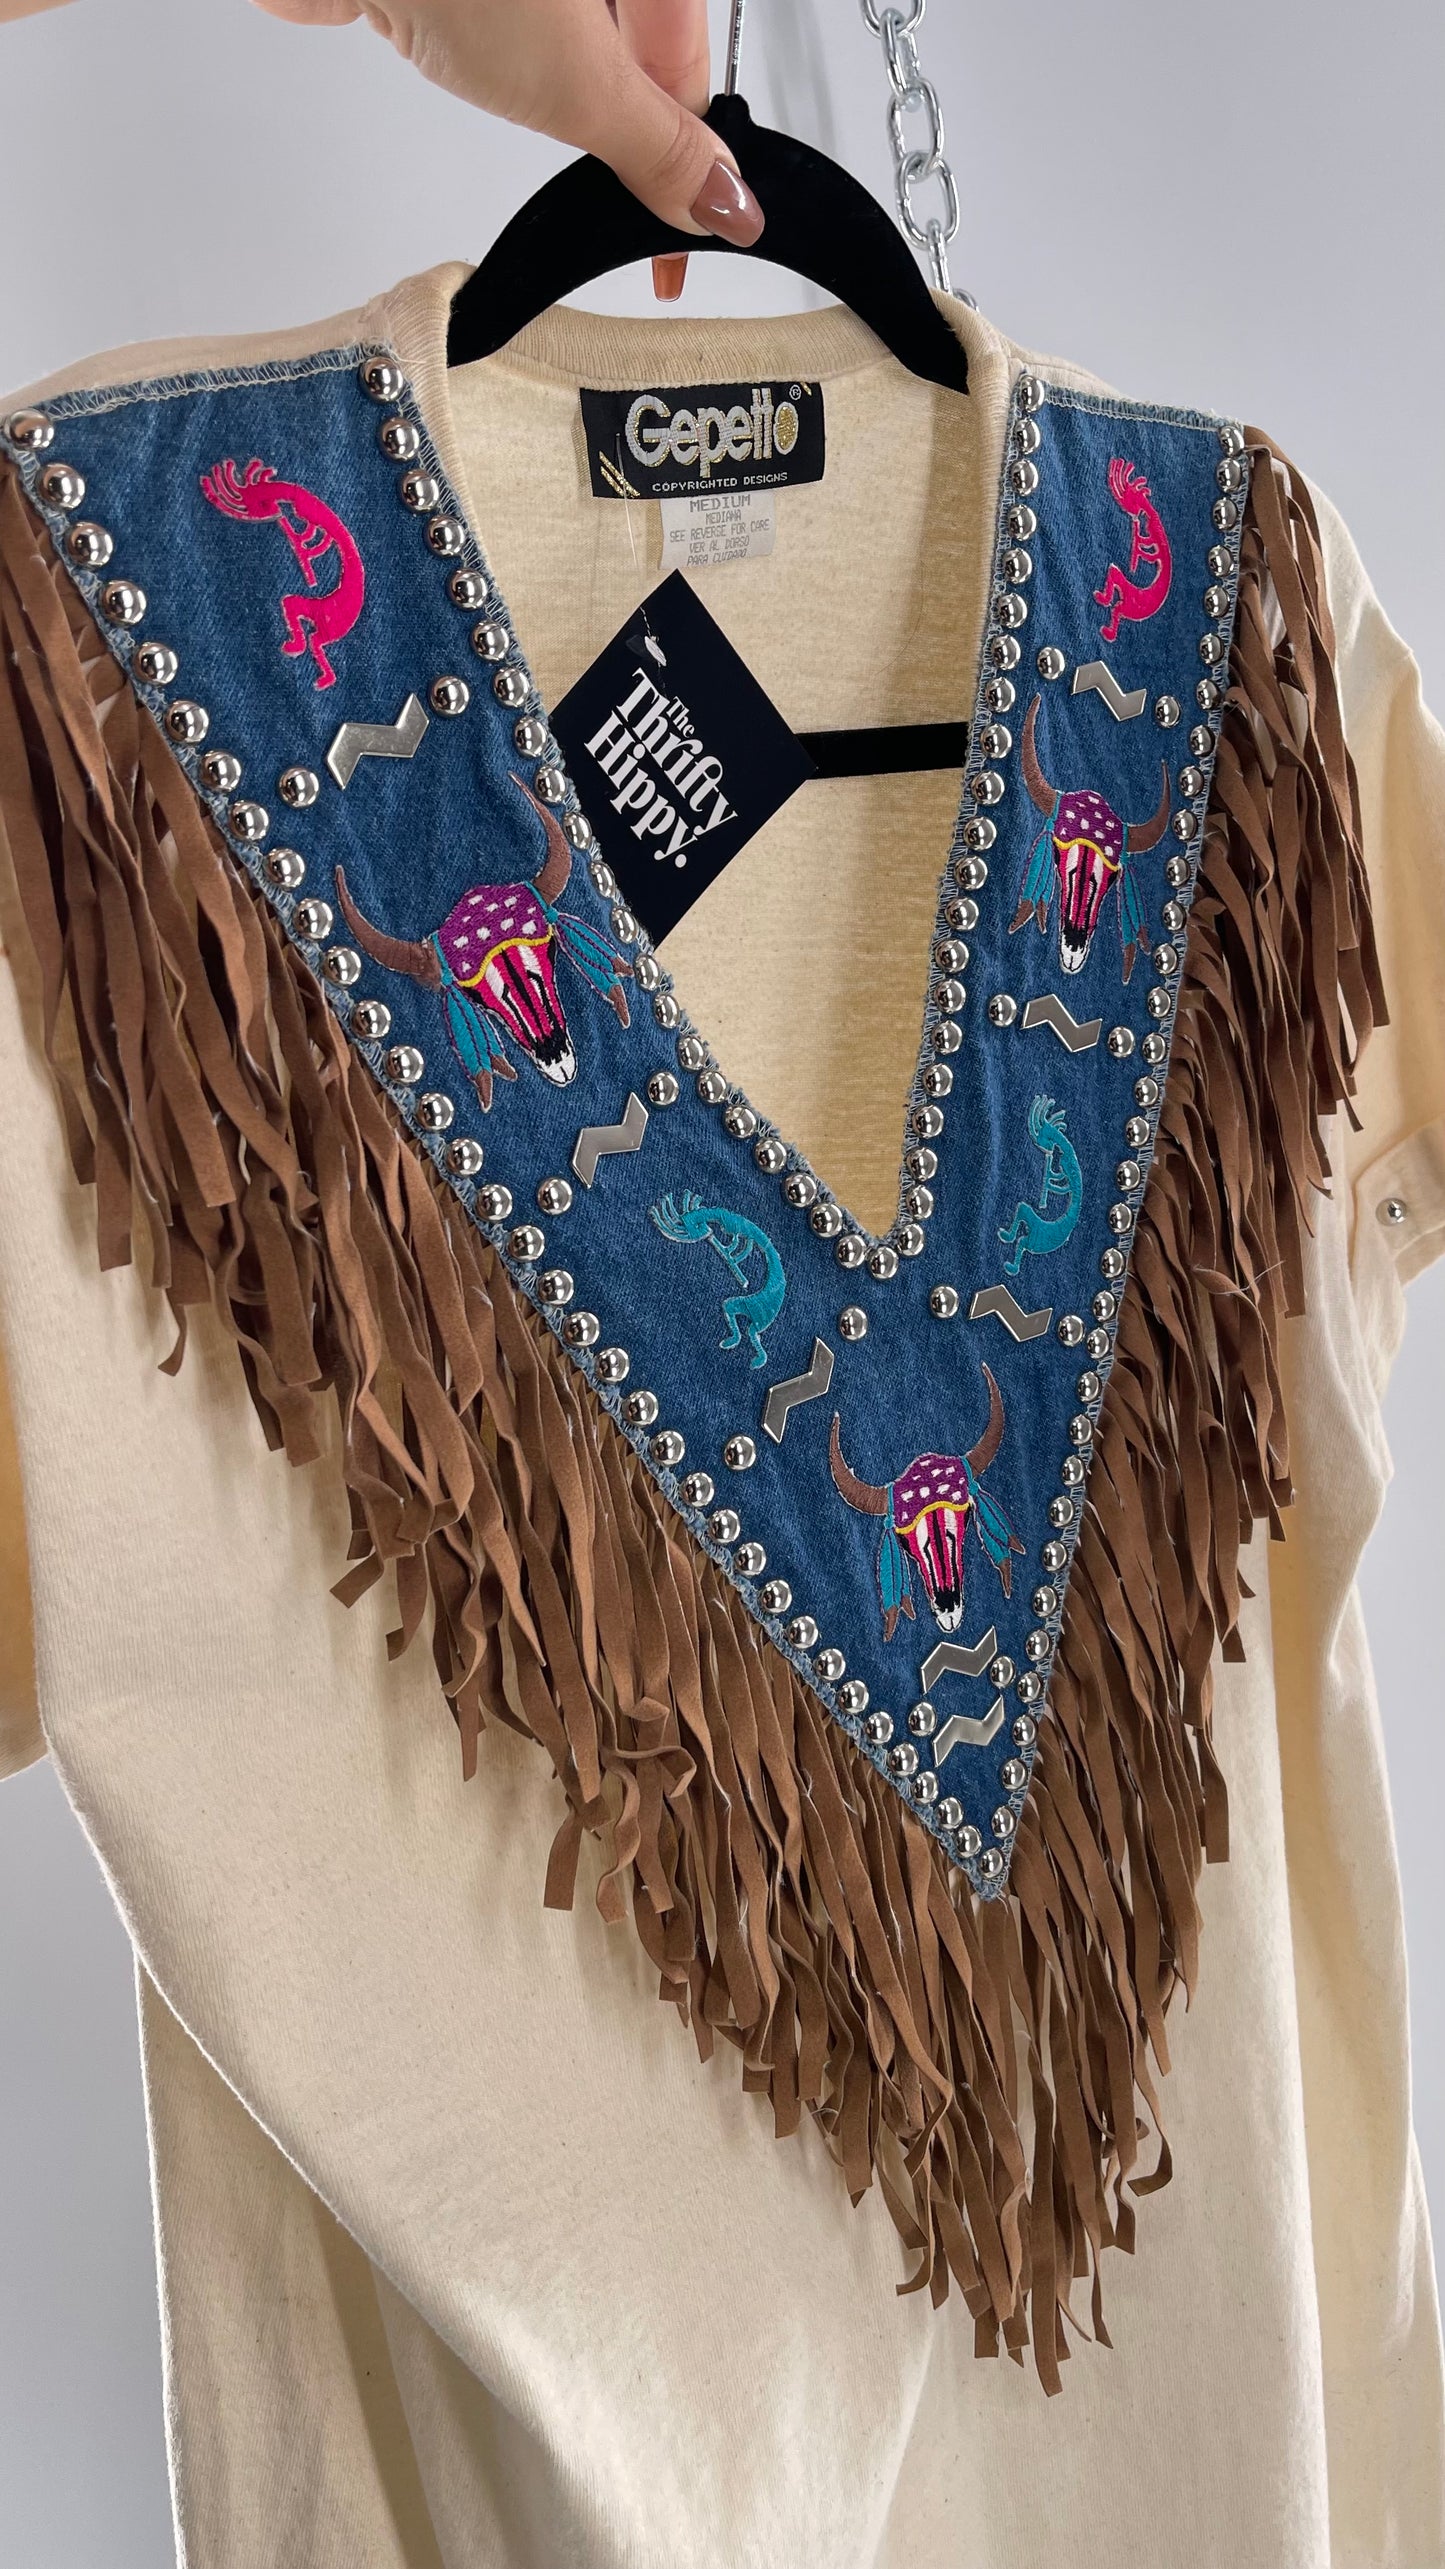 Vintage 1980s GEPETTO Off White Rodeo Western T Shirt with Denim Lined V Neck, Faux Leather Fringe Detail, Embroidery, and Heavy Duty Studs